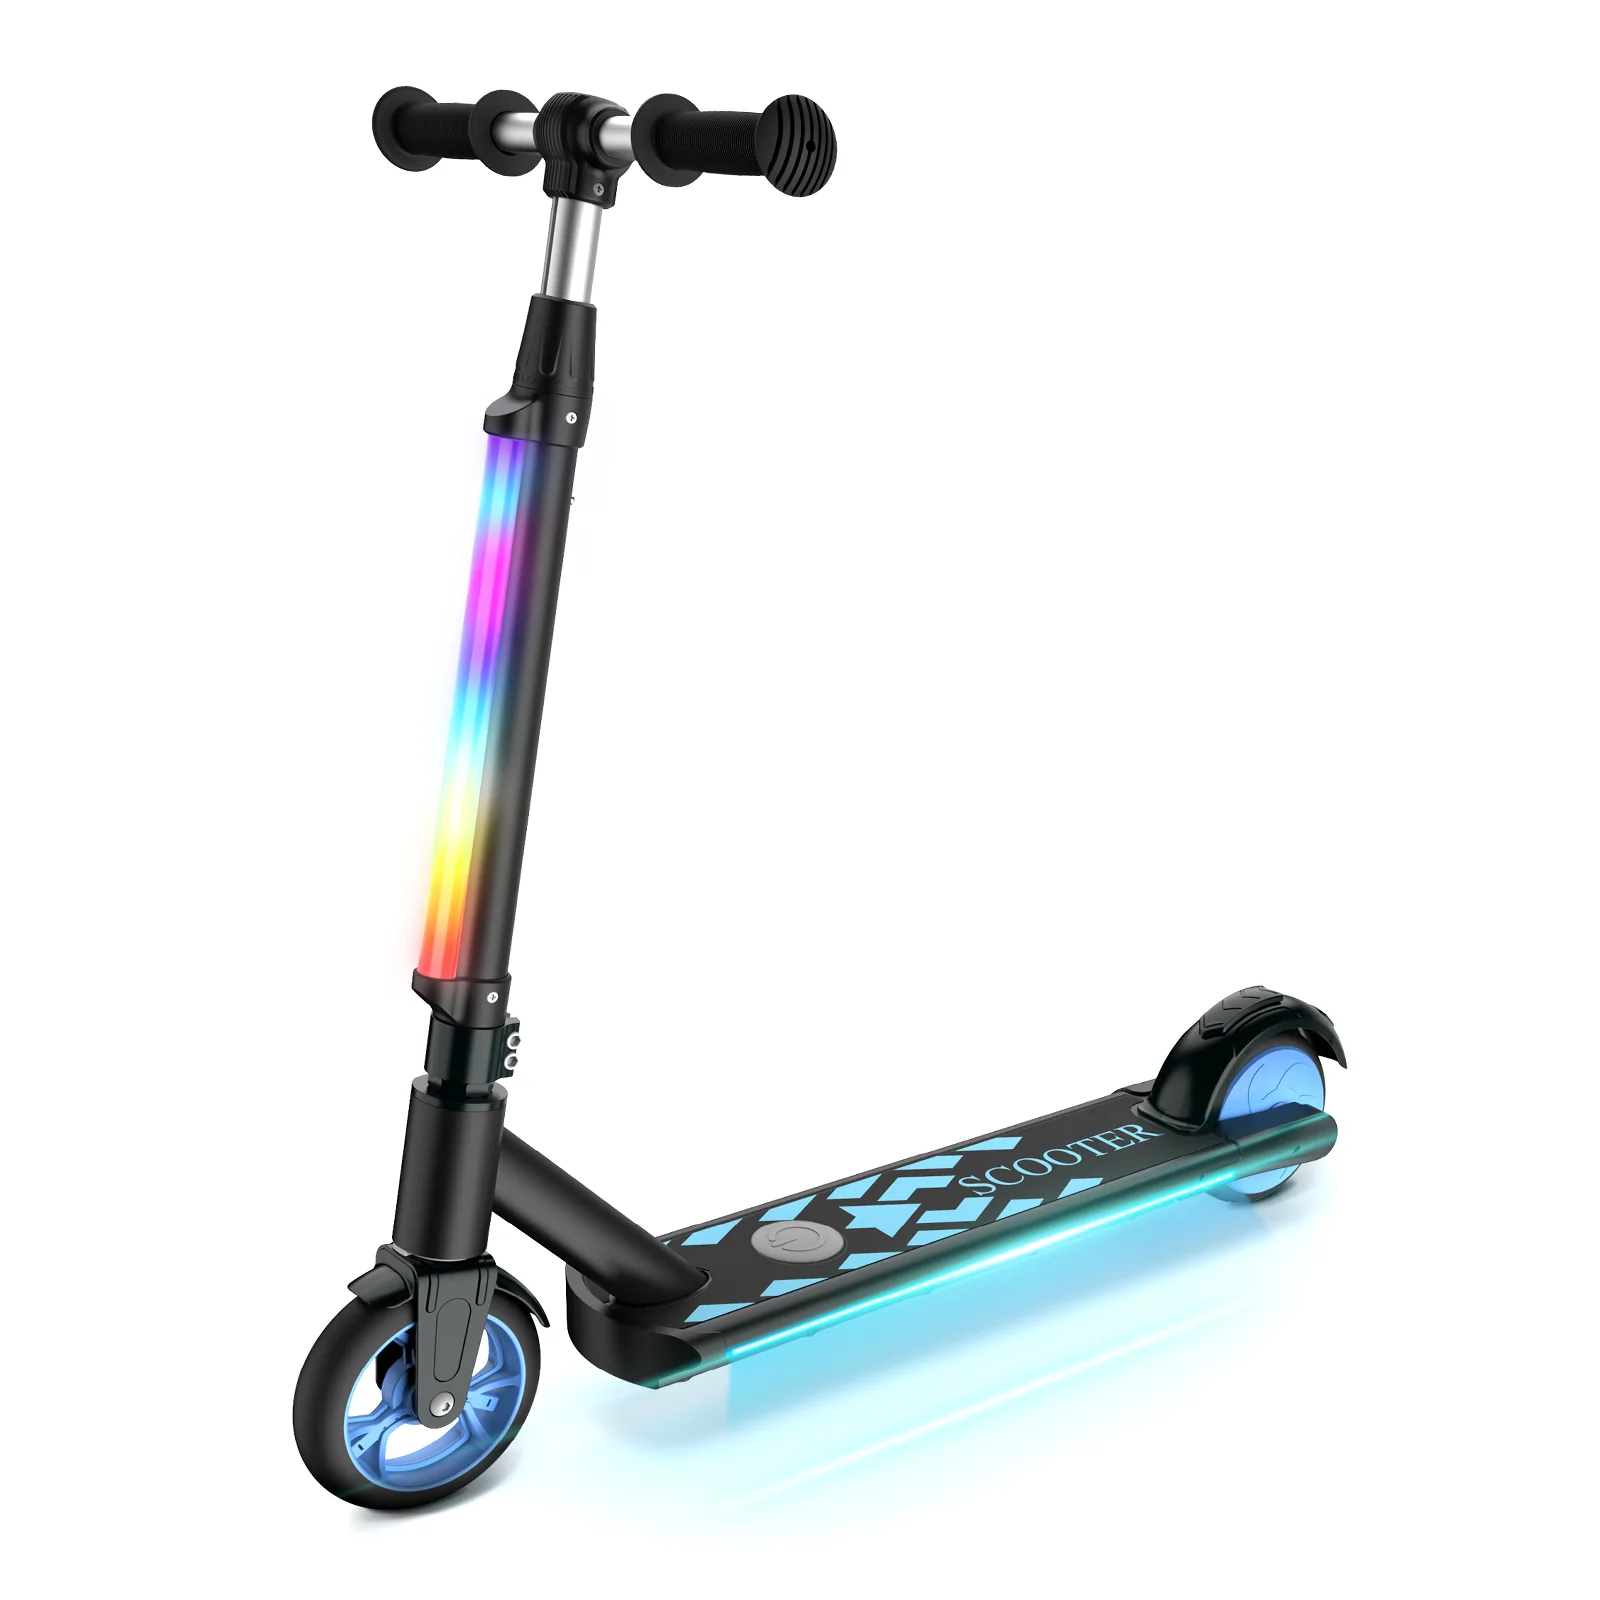 SISIGAD 530 (12 mph) Adjustable Electric Scooter For Boys & Girls